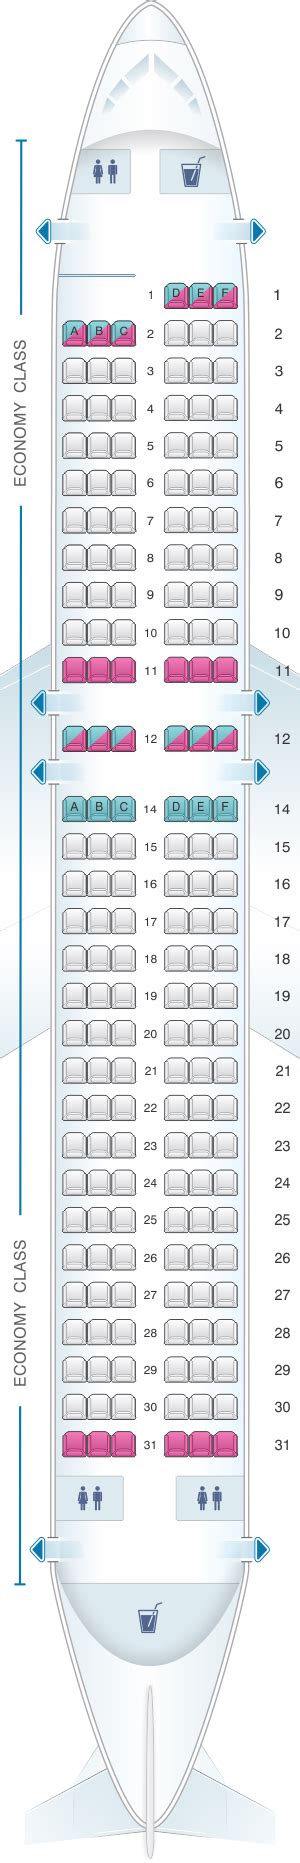 Seat 52 B is a standard Economy Class seat in t